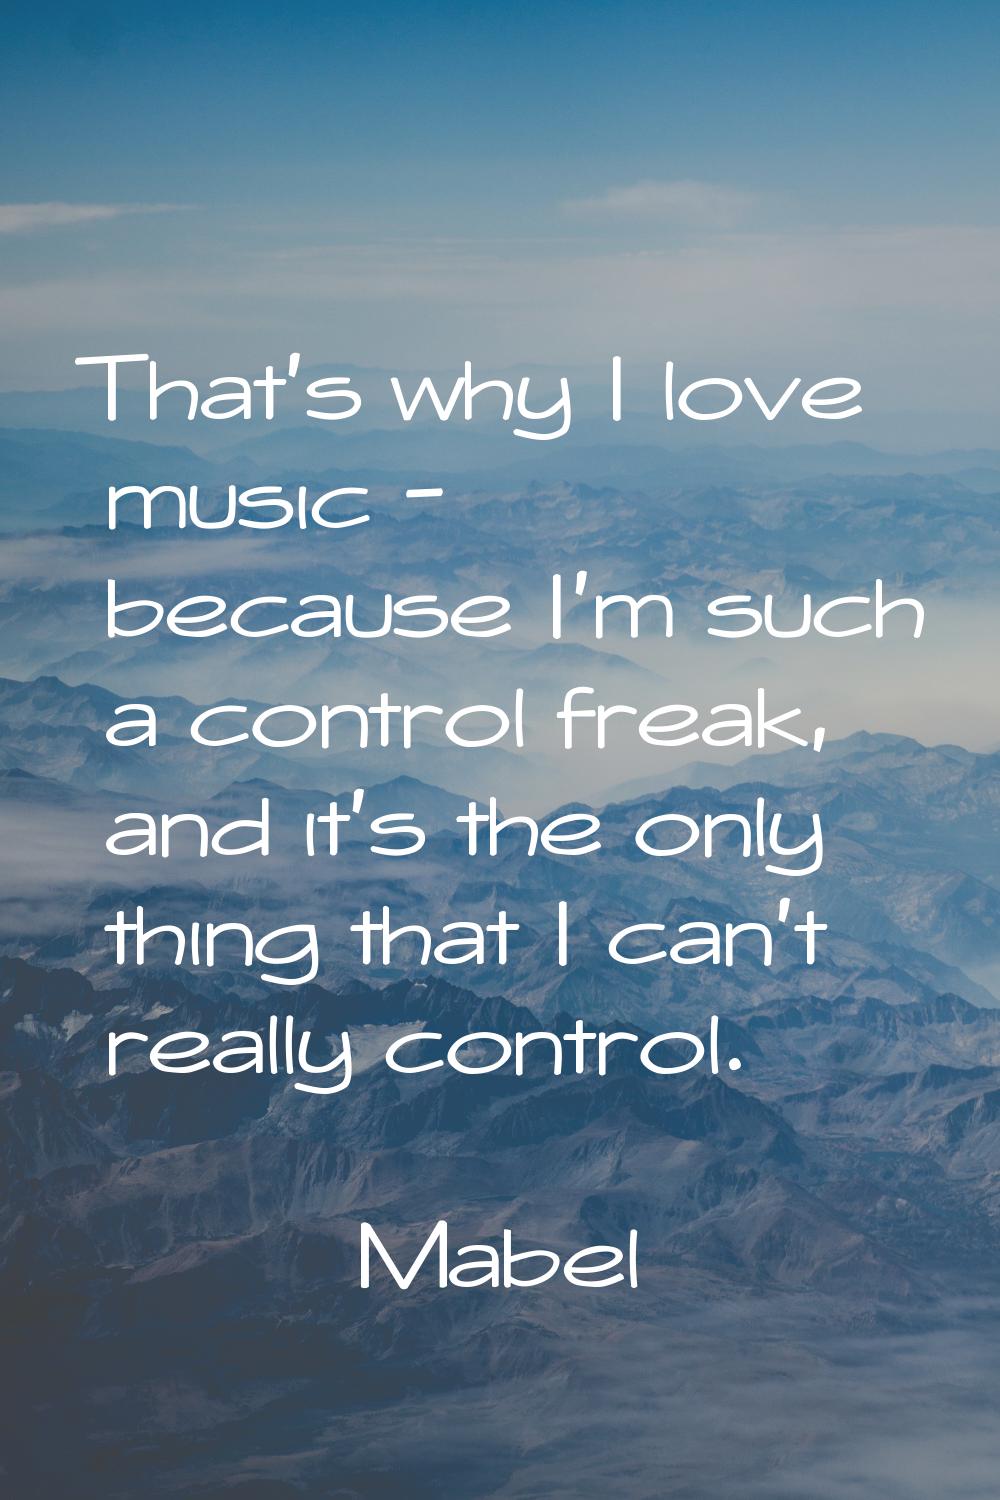 That's why I love music - because I'm such a control freak, and it's the only thing that I can't re